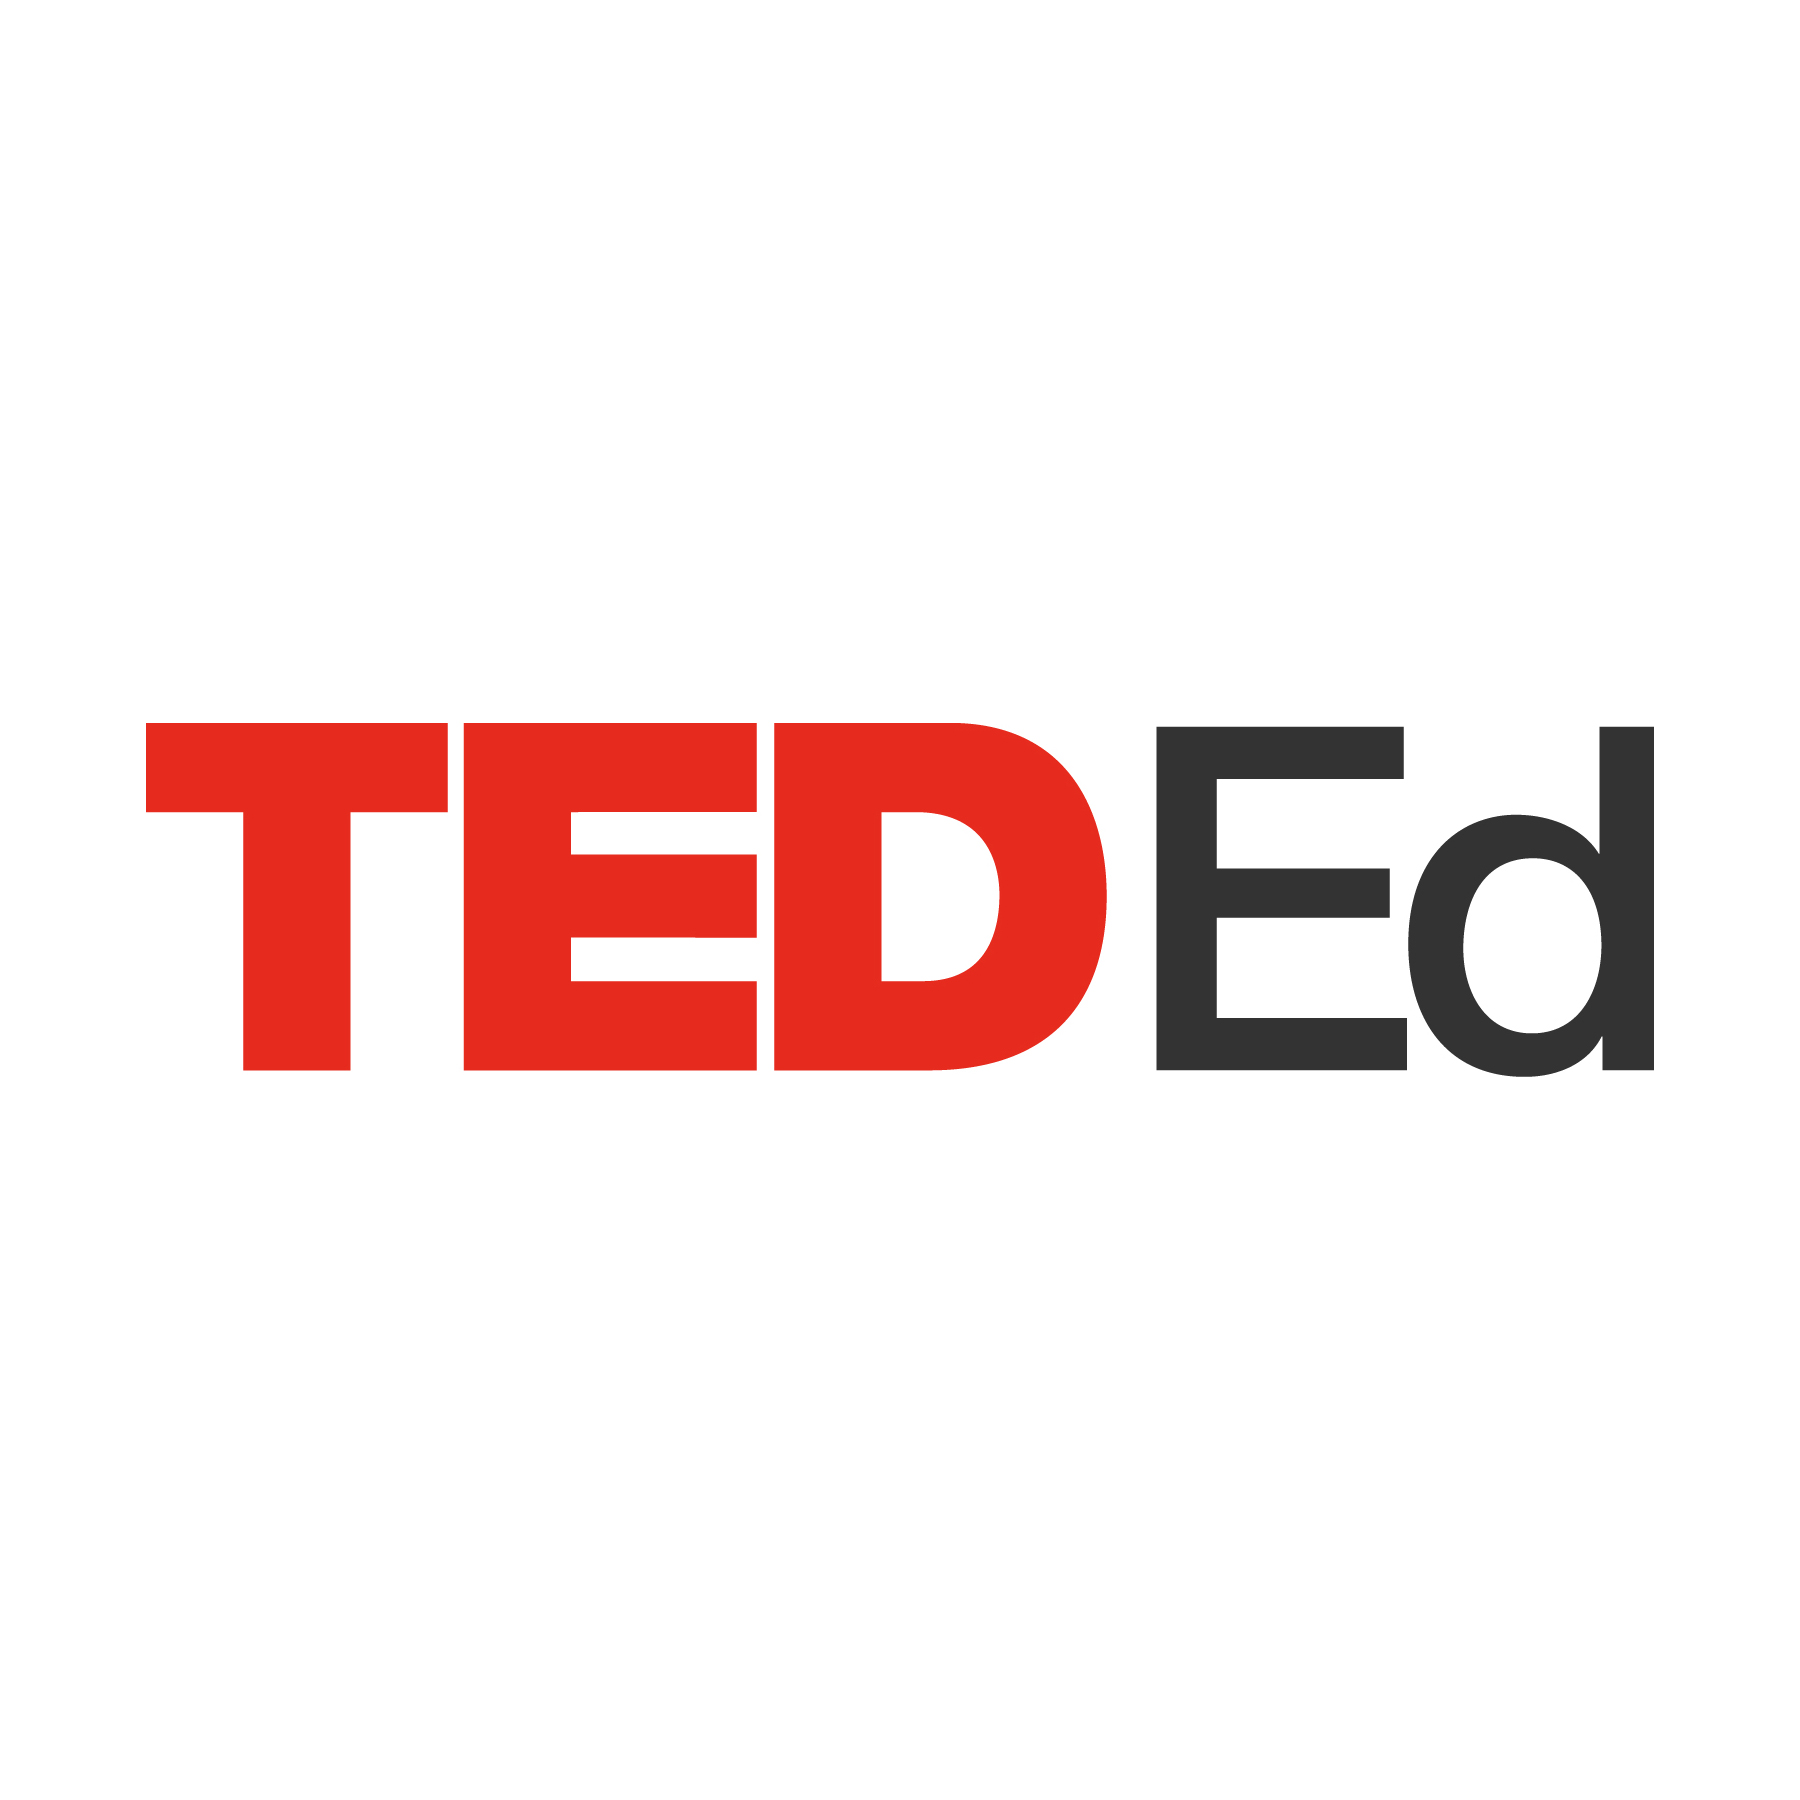 About TED-Ed